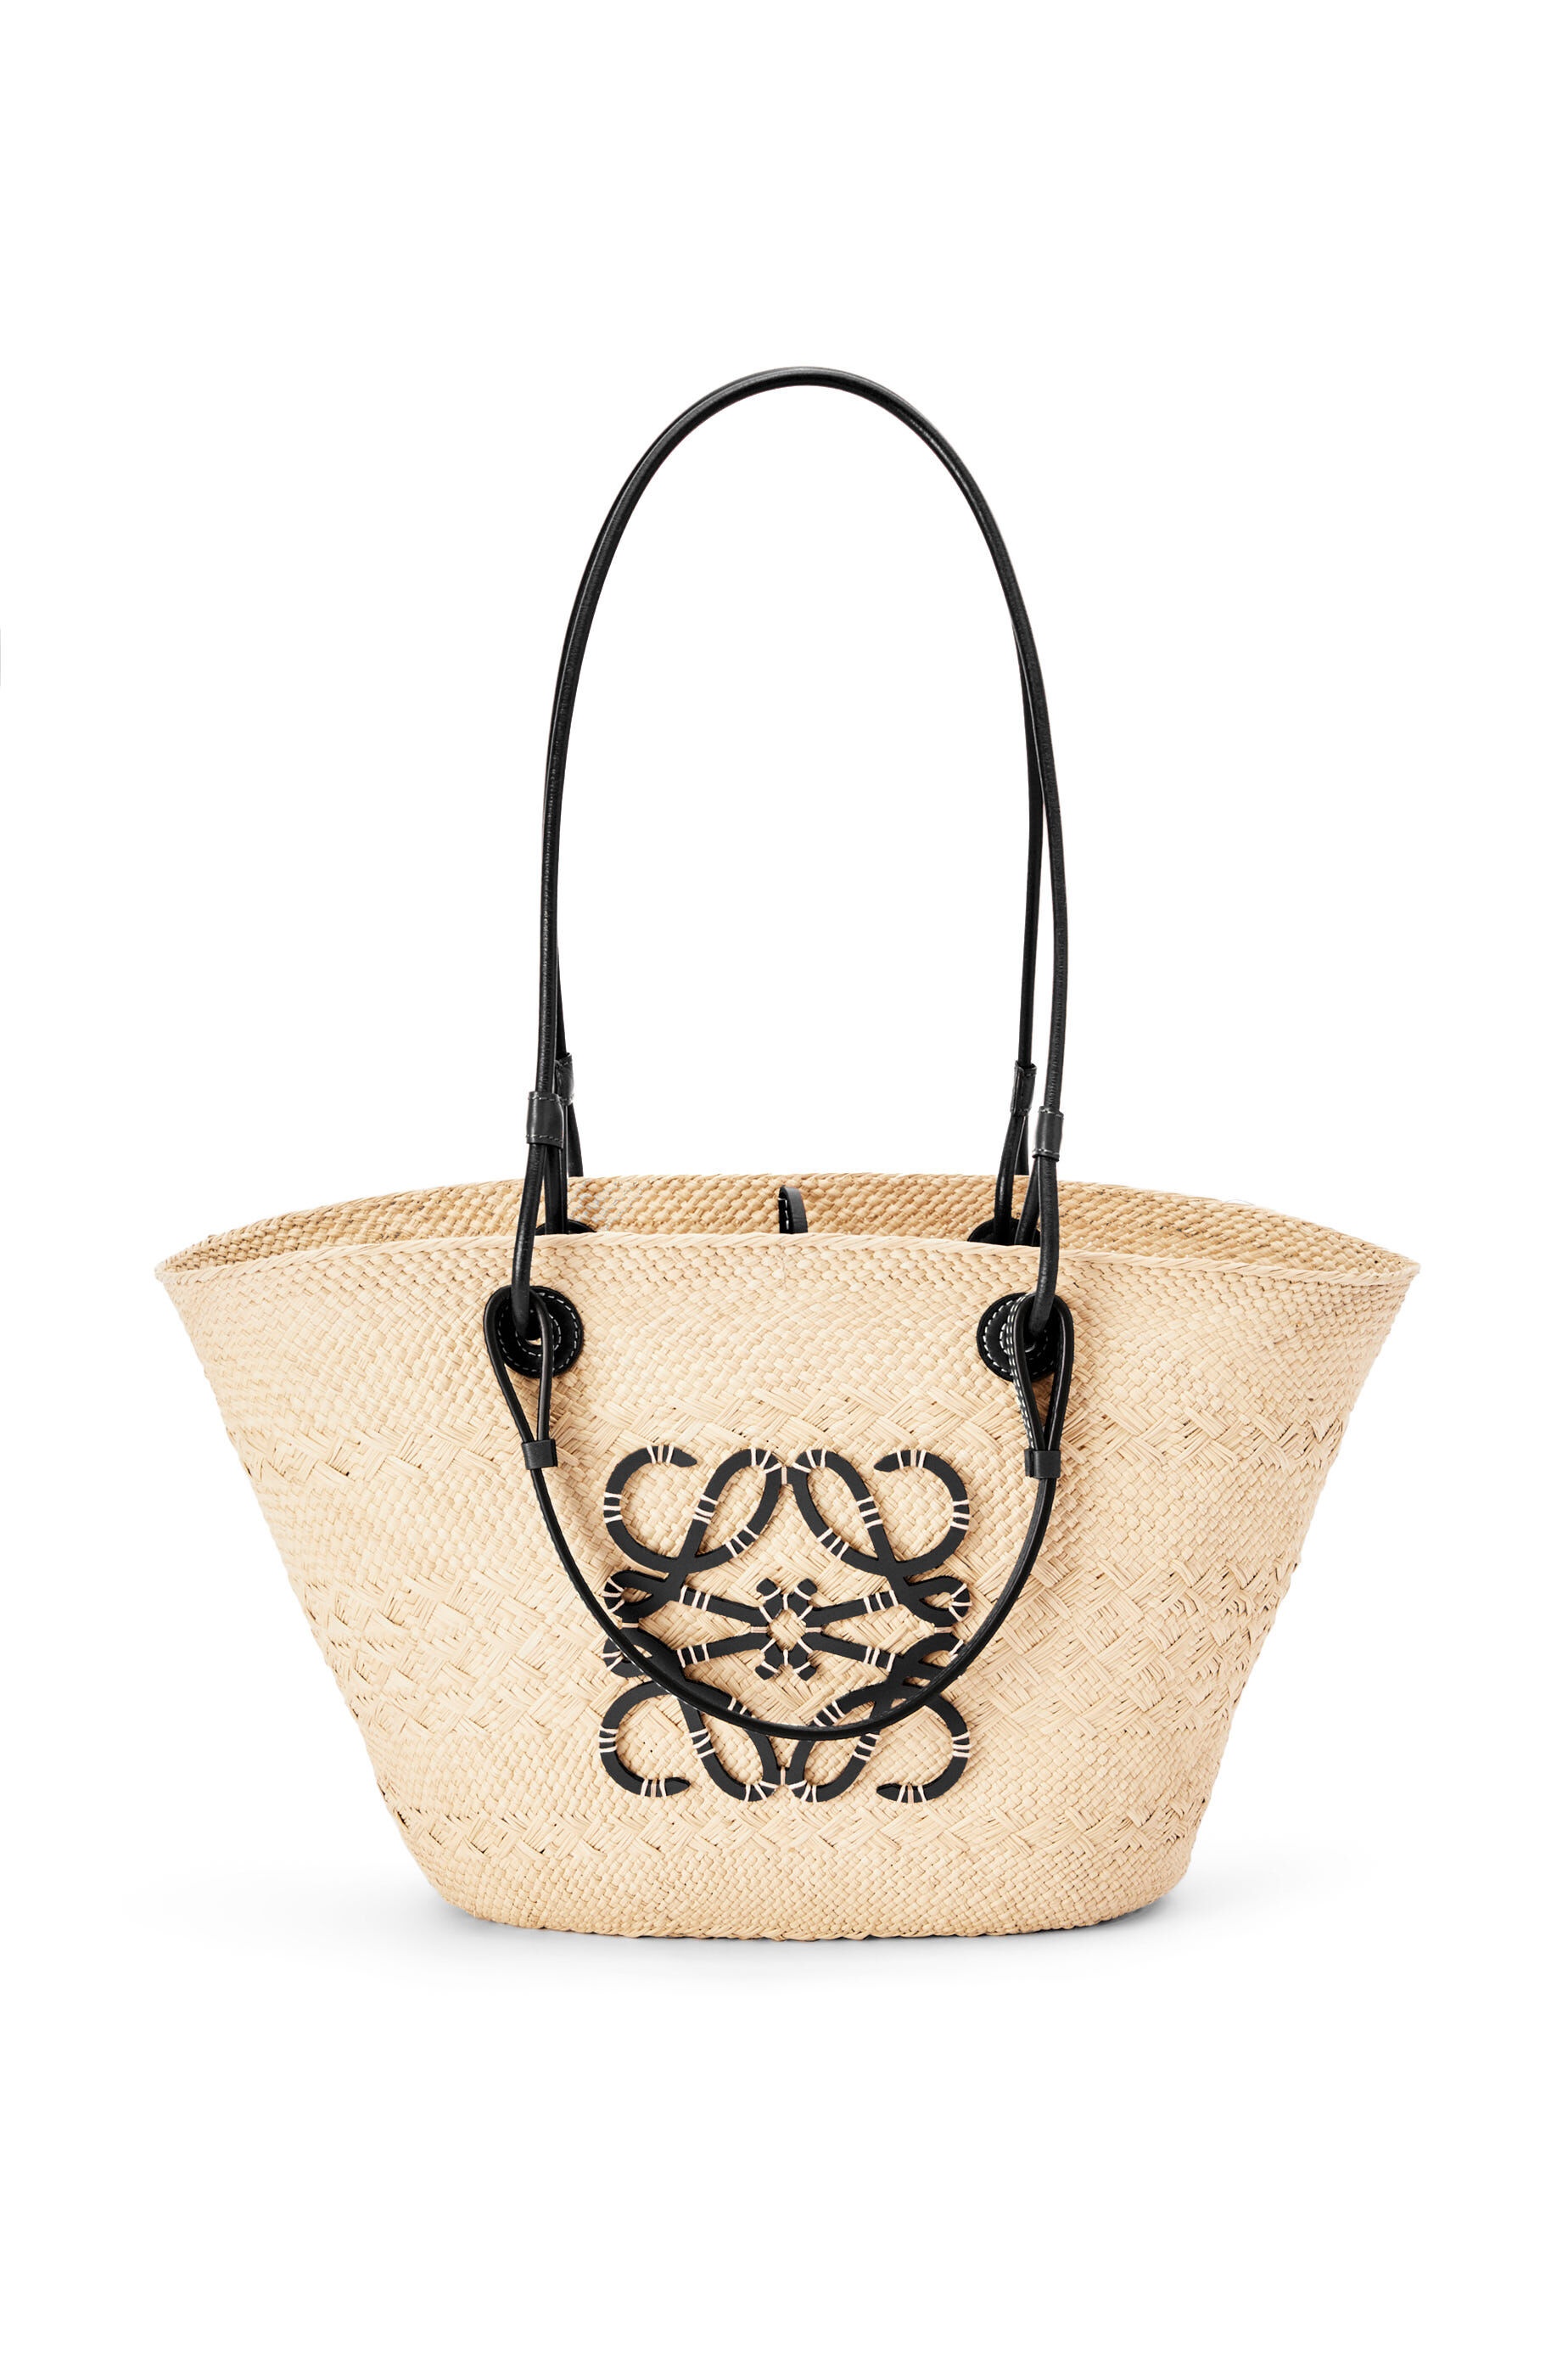 Anagram Basket bag in iraca palm and calfskin - 1